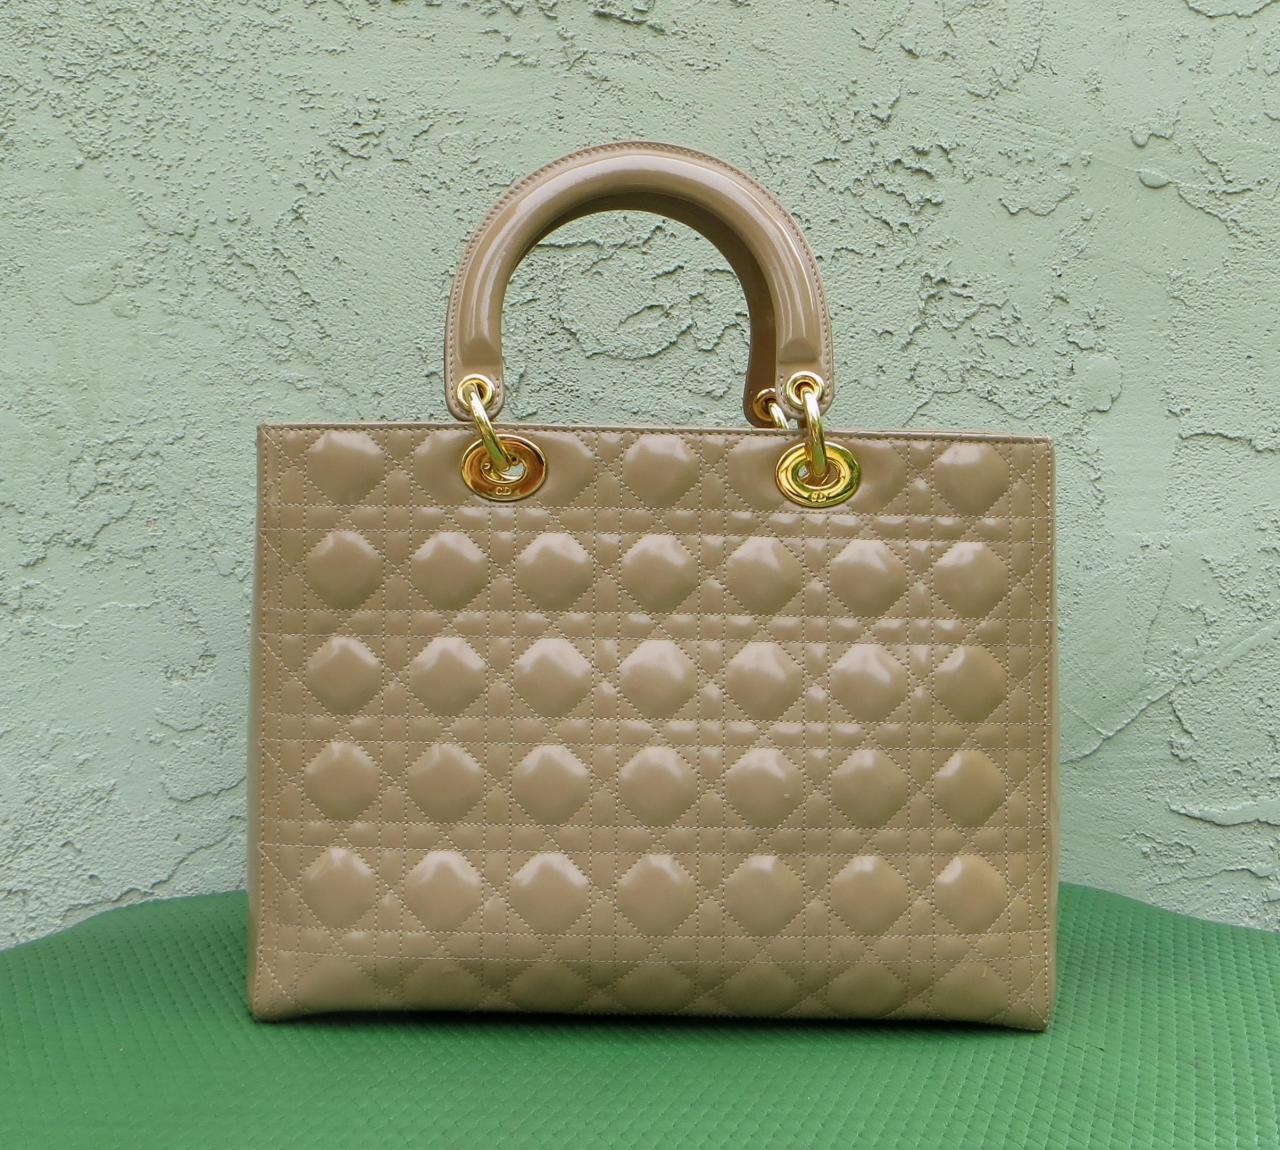 Italy Replica Bags Dior Lady Dior Large Purse Beige Patent Leather Tote - Best Replica Celine ...